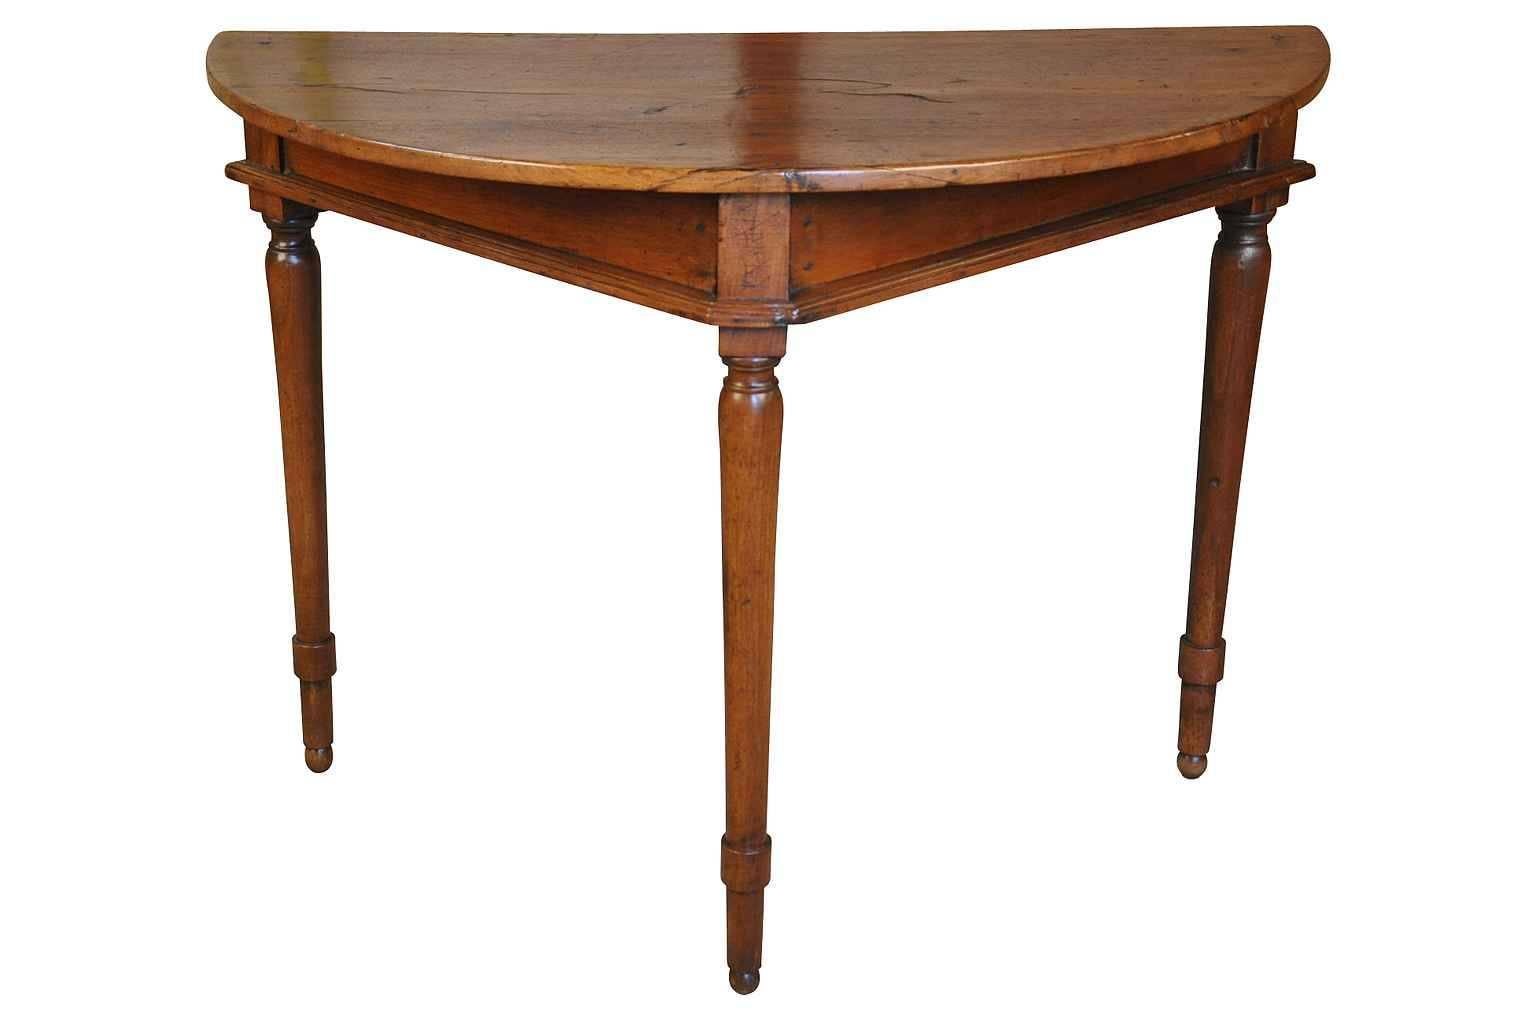 A very handsome mid-19th century demilune console from Spain. Soundly constructed from chestnut with very rich and luminous patina. A wonderful occasional table that will serve nicely as a bedside table as well.